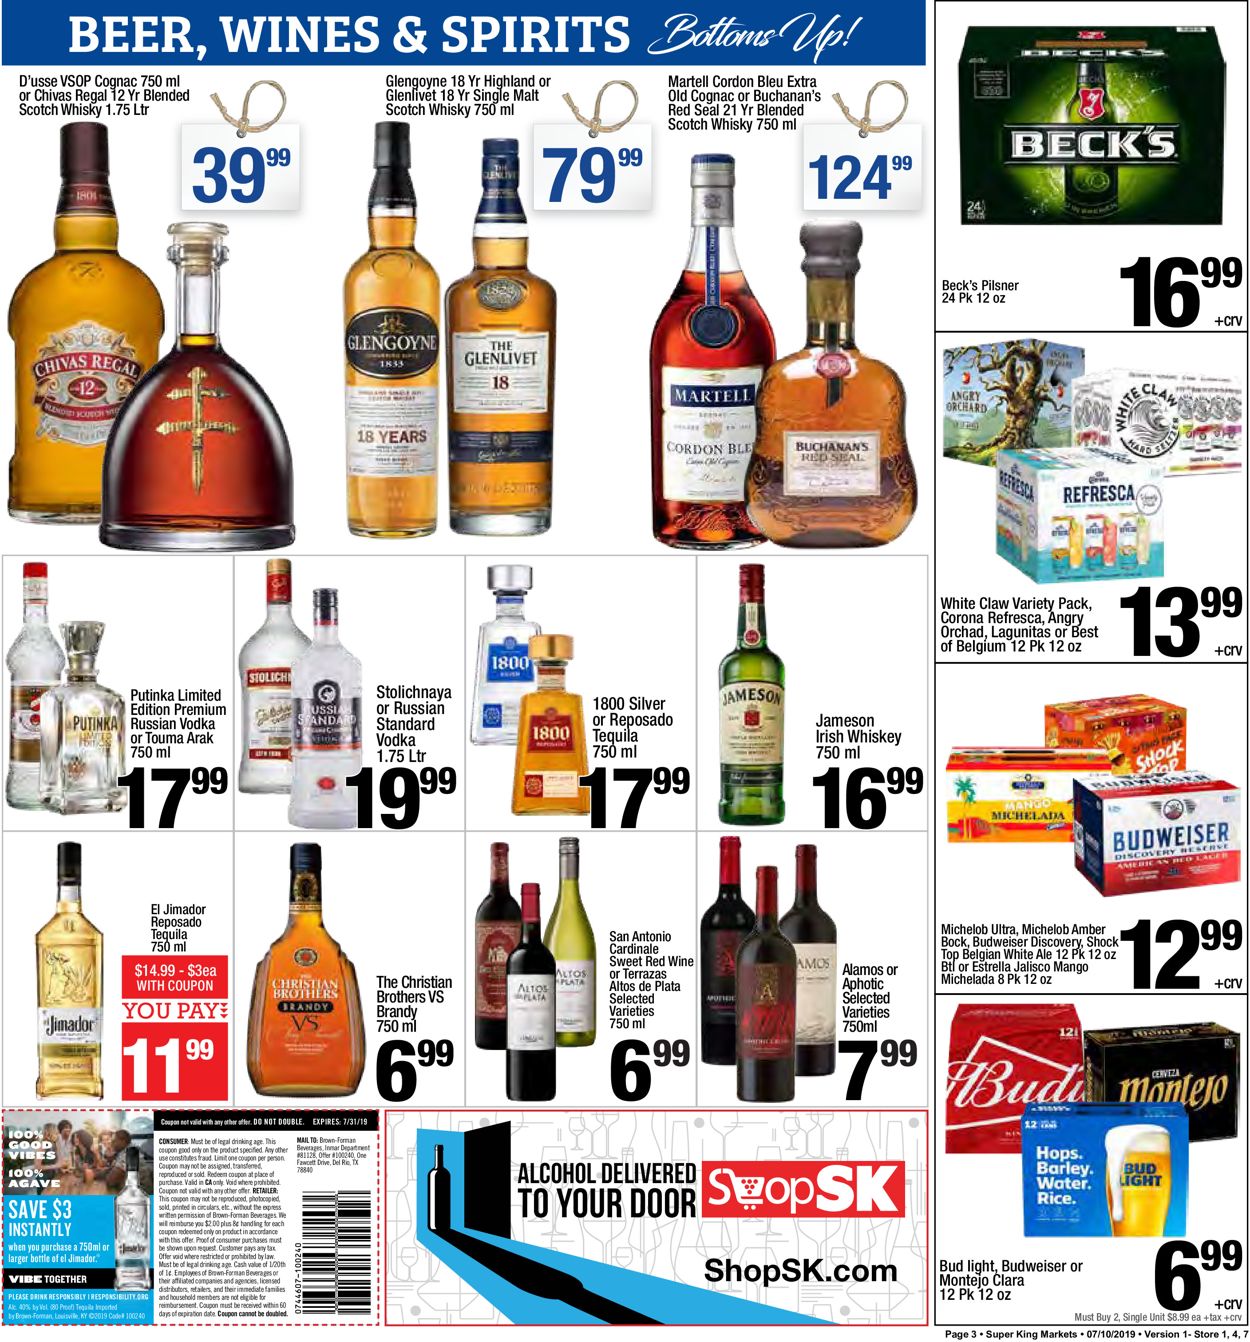 Super King Market Current weekly ad 07/10 - 07/16/2019 [3